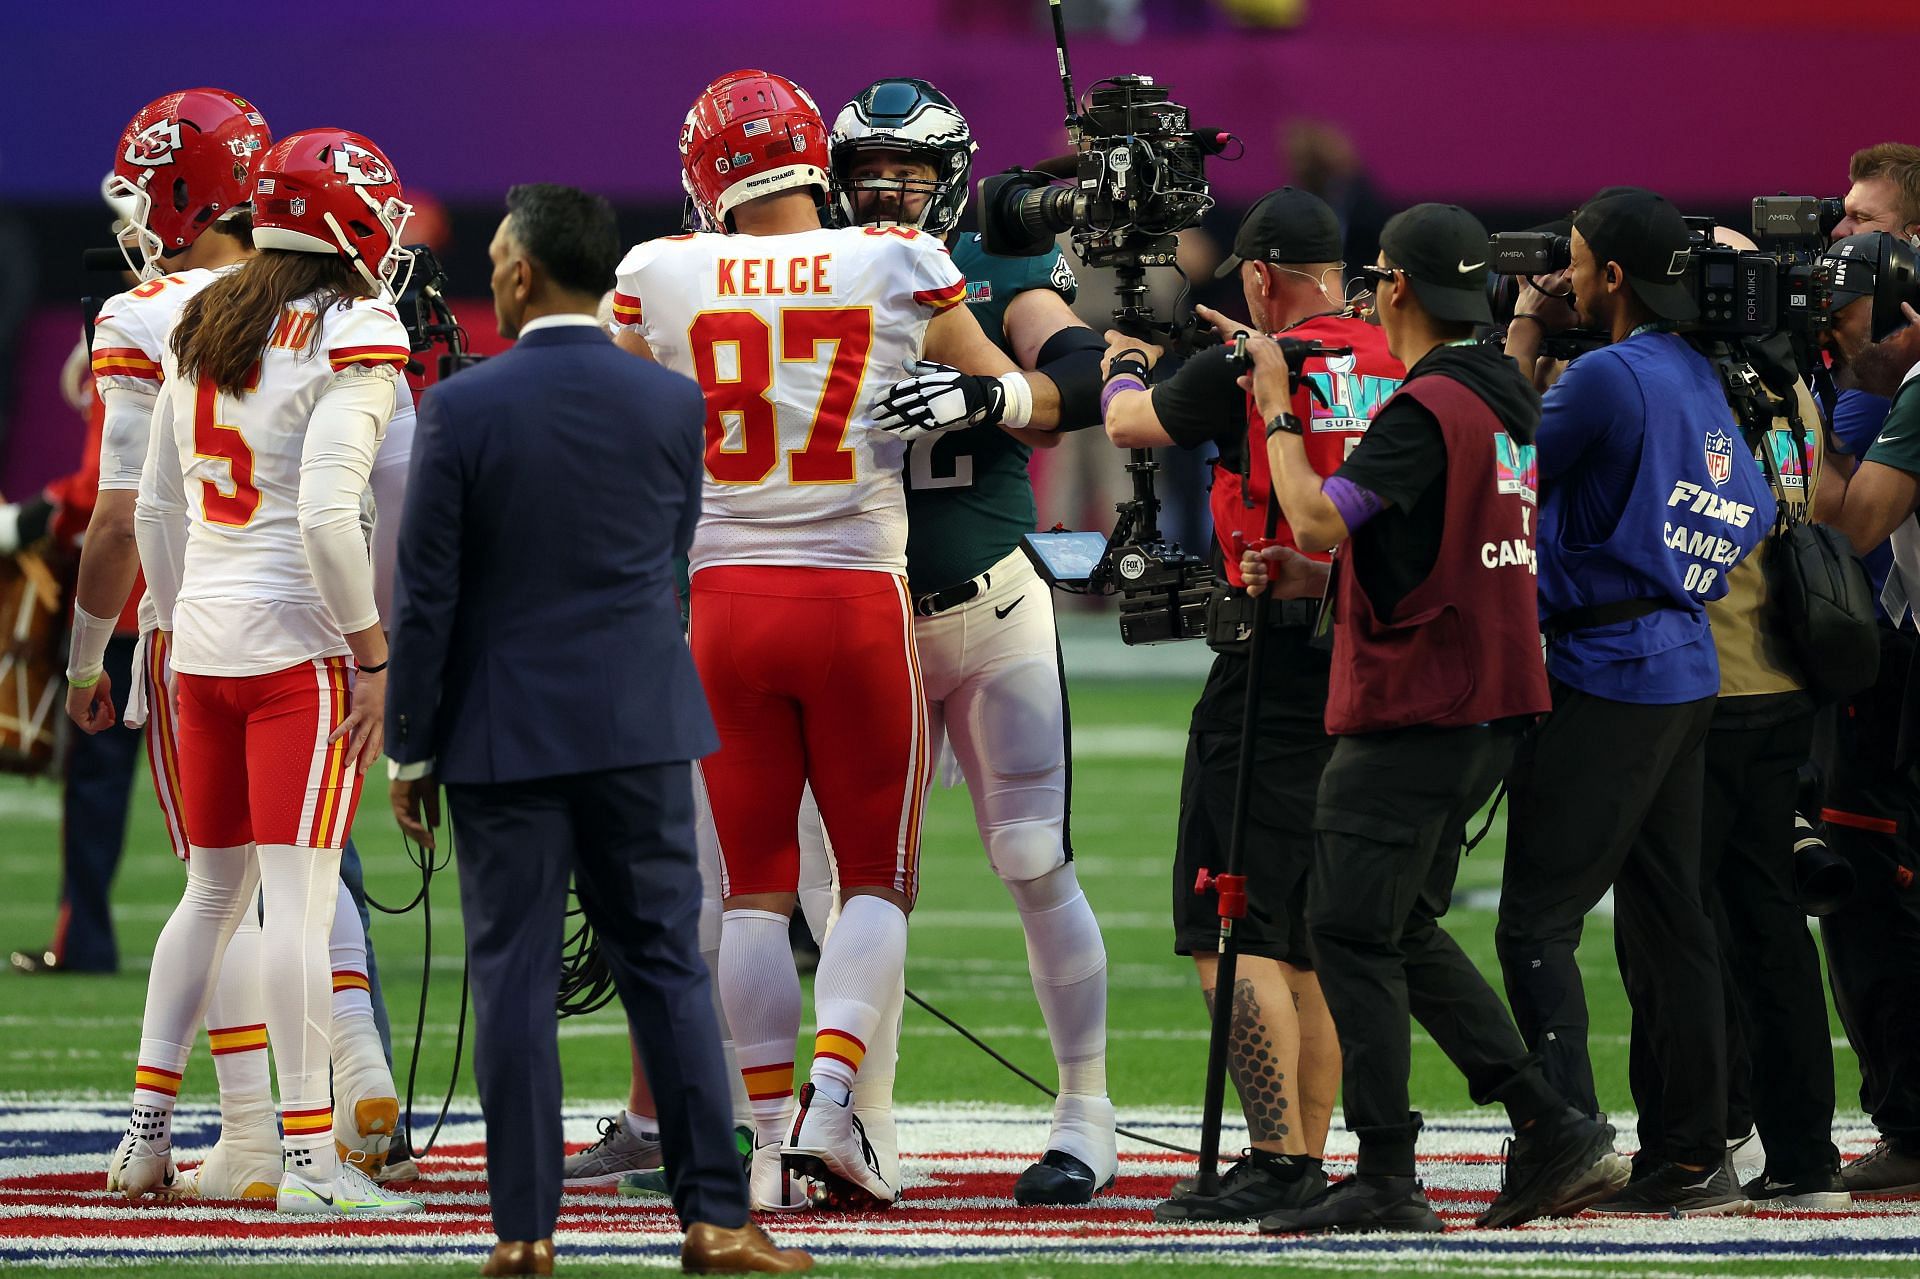 The Kelce brothers at midfield ahaed of Super Bowl LVII